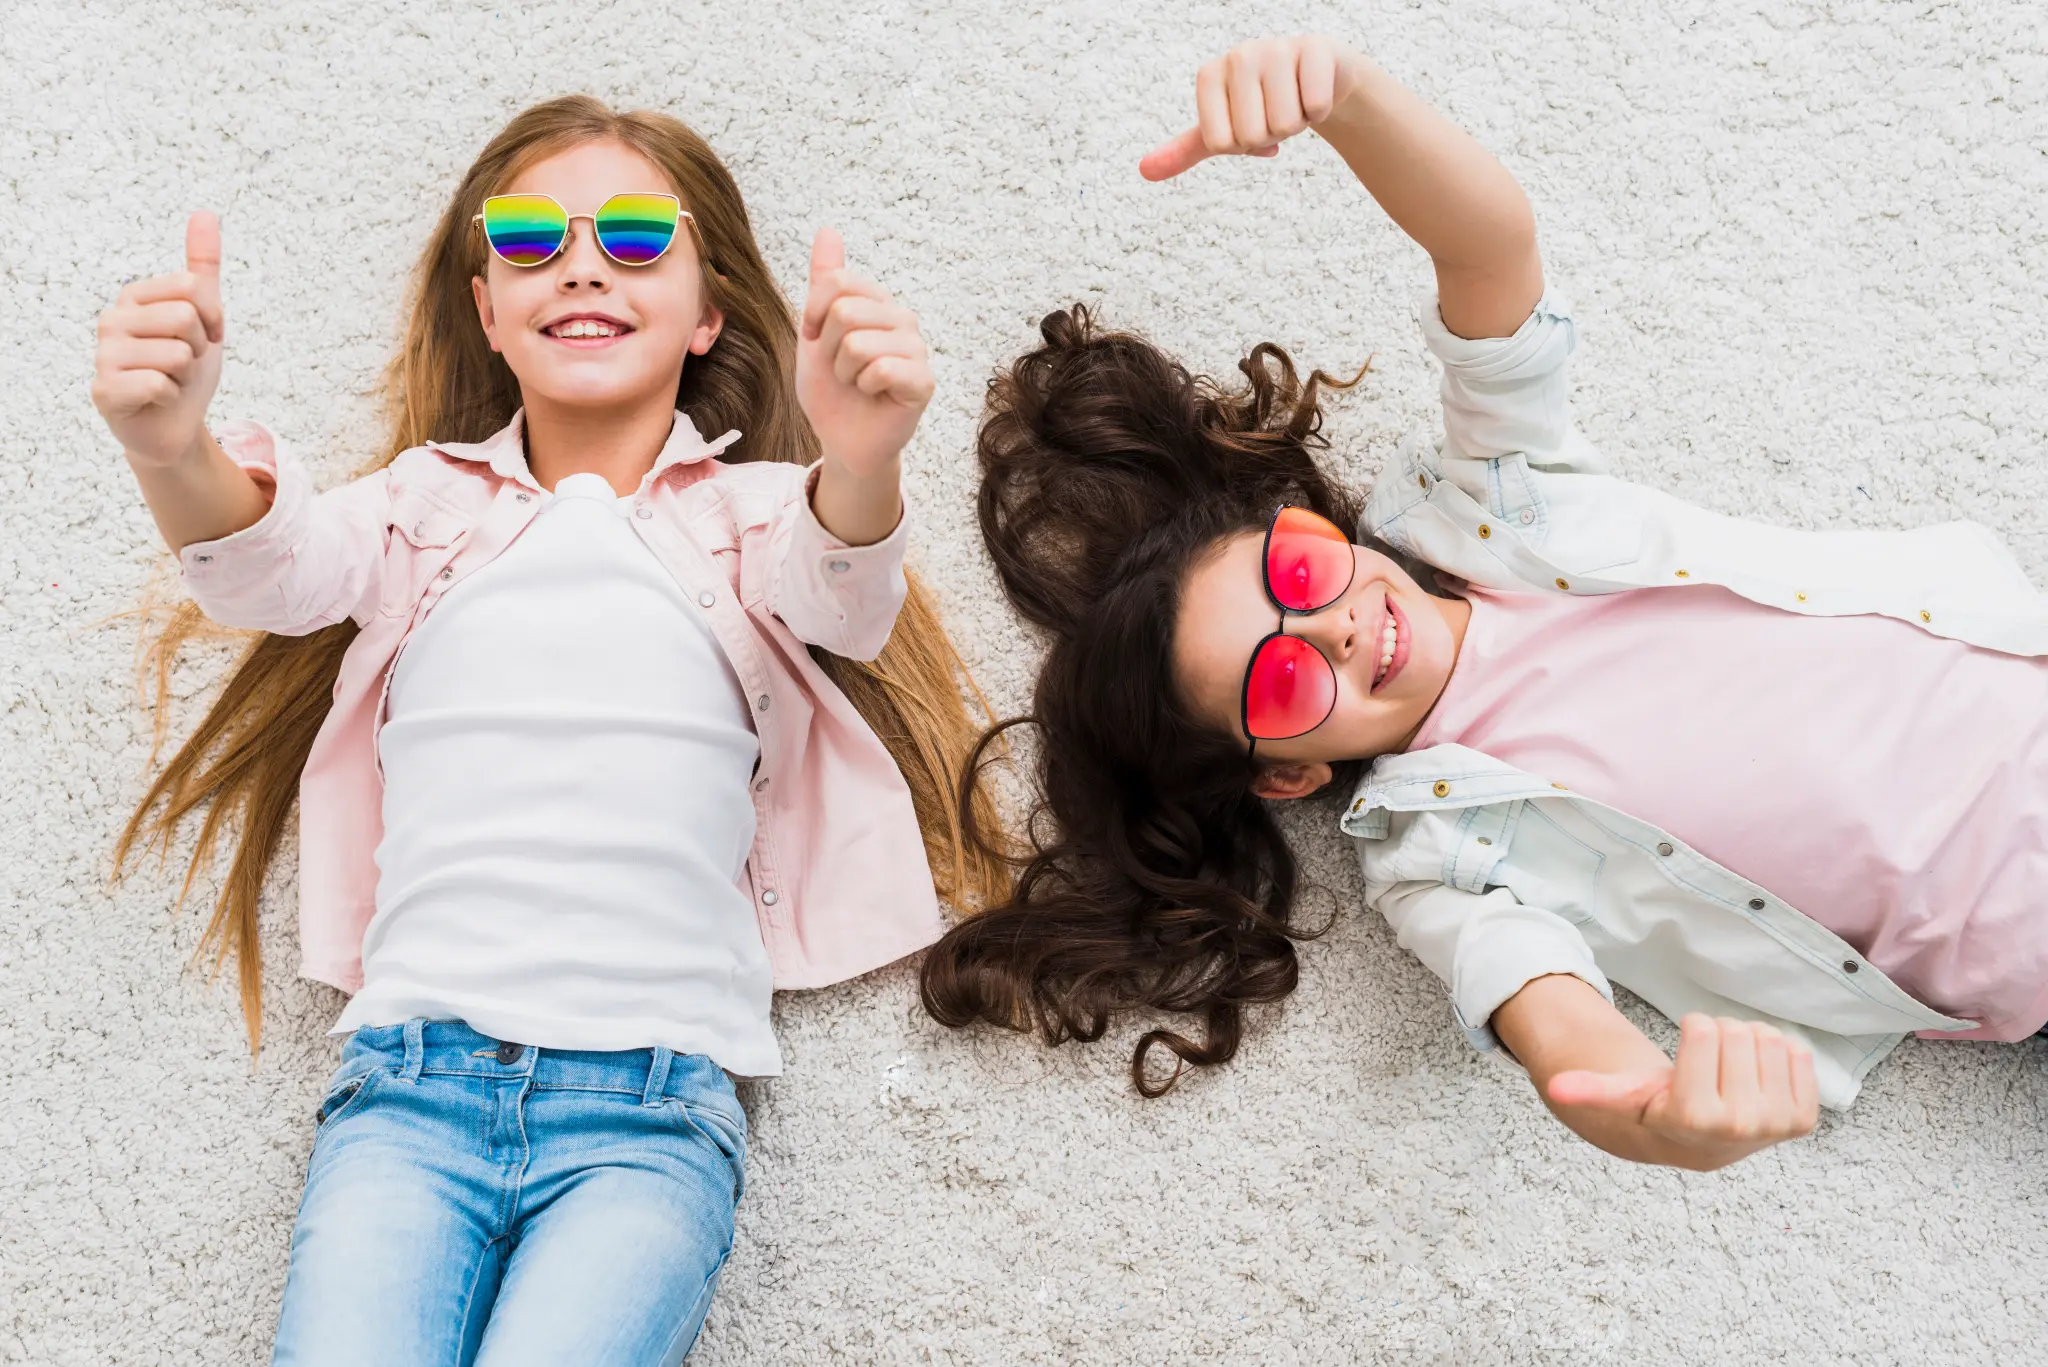 Two young girls lying on a carpet wearing sunglasses and giving thumbs up